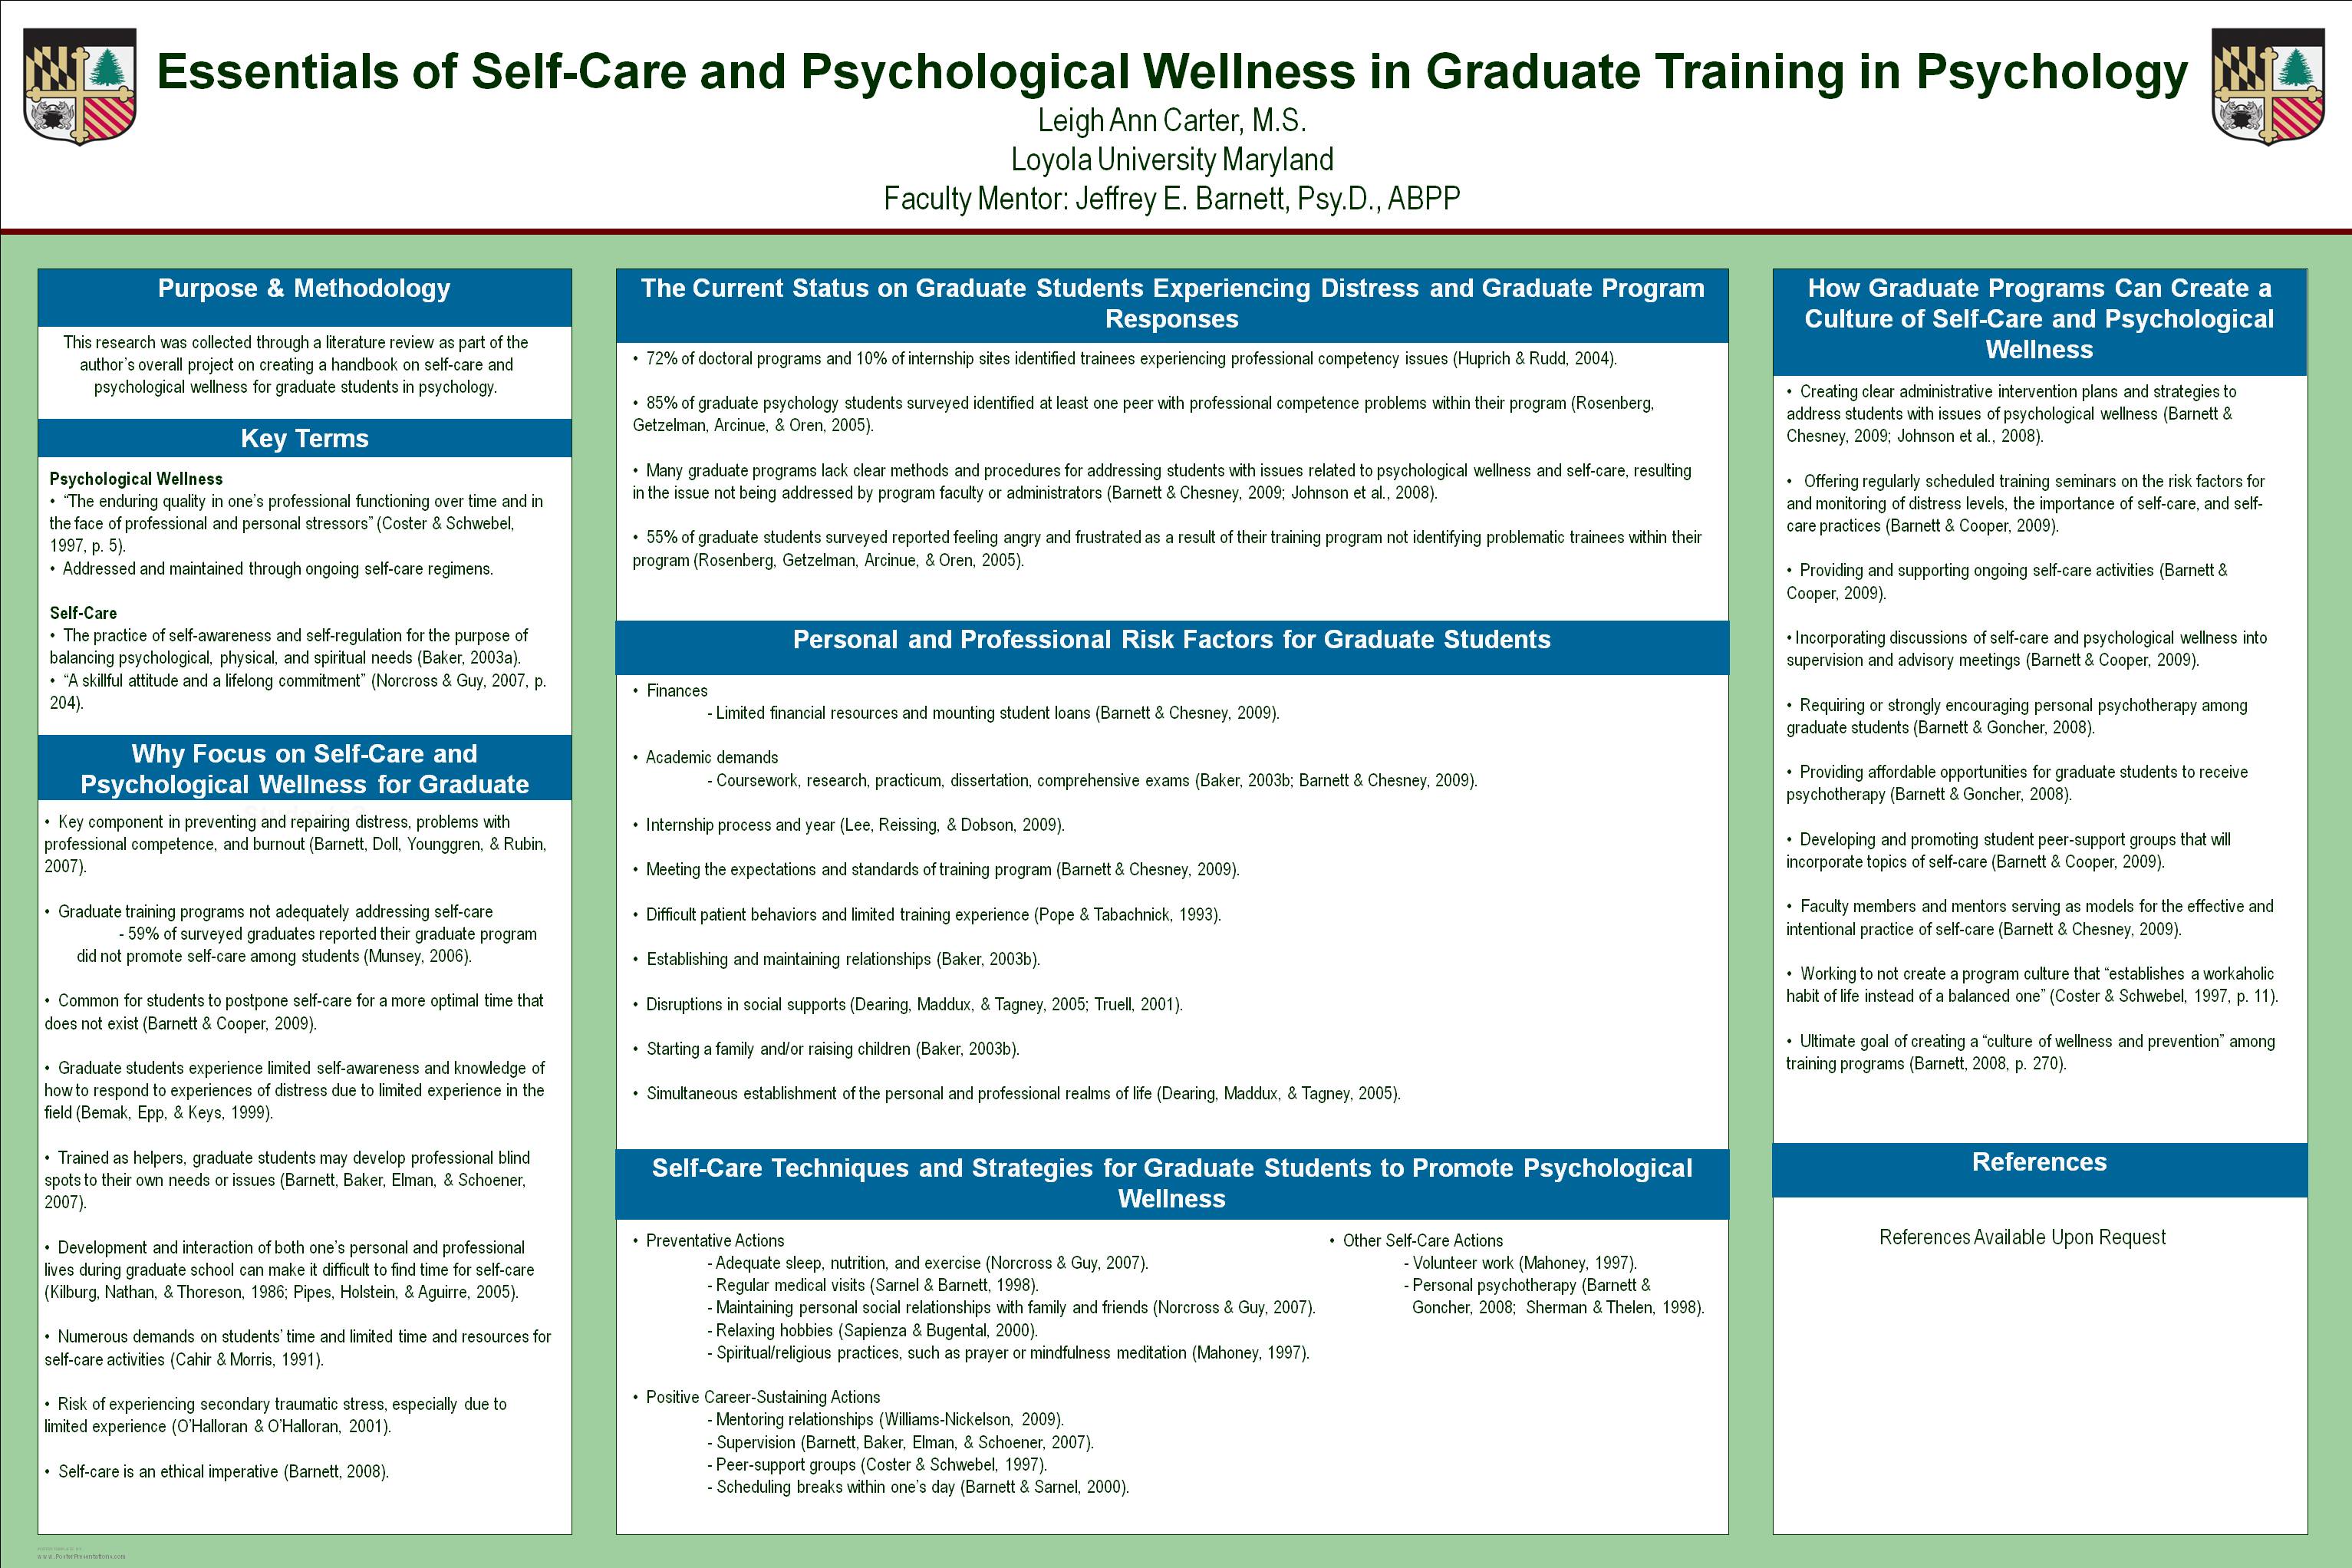 Poster image: Essentials of Self-Care and Psychological Wellness in Graduate Training in Psychology